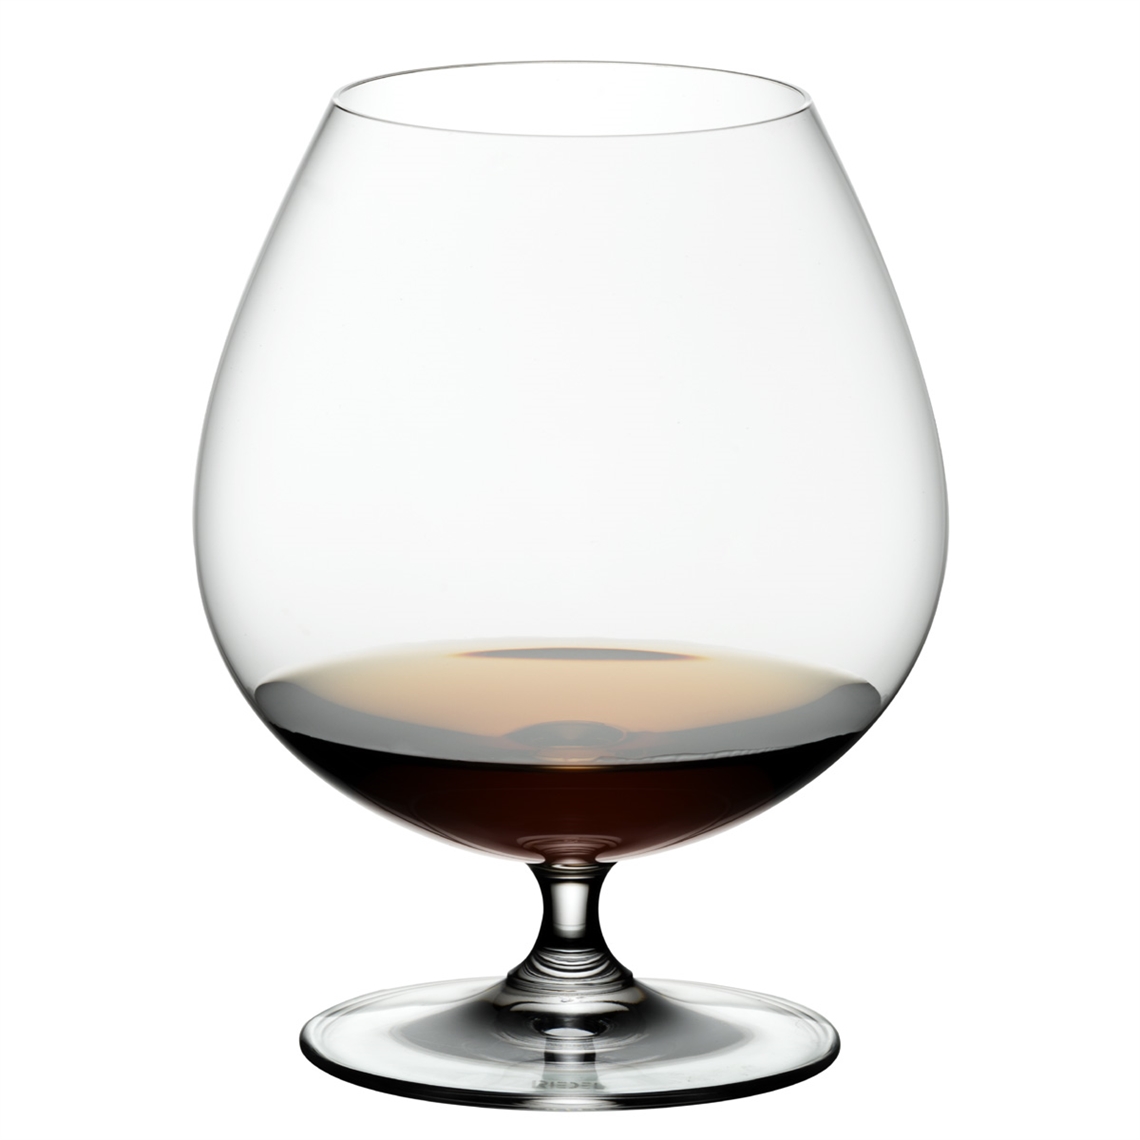 View more schott zwiesel from our Spirit Glasses range